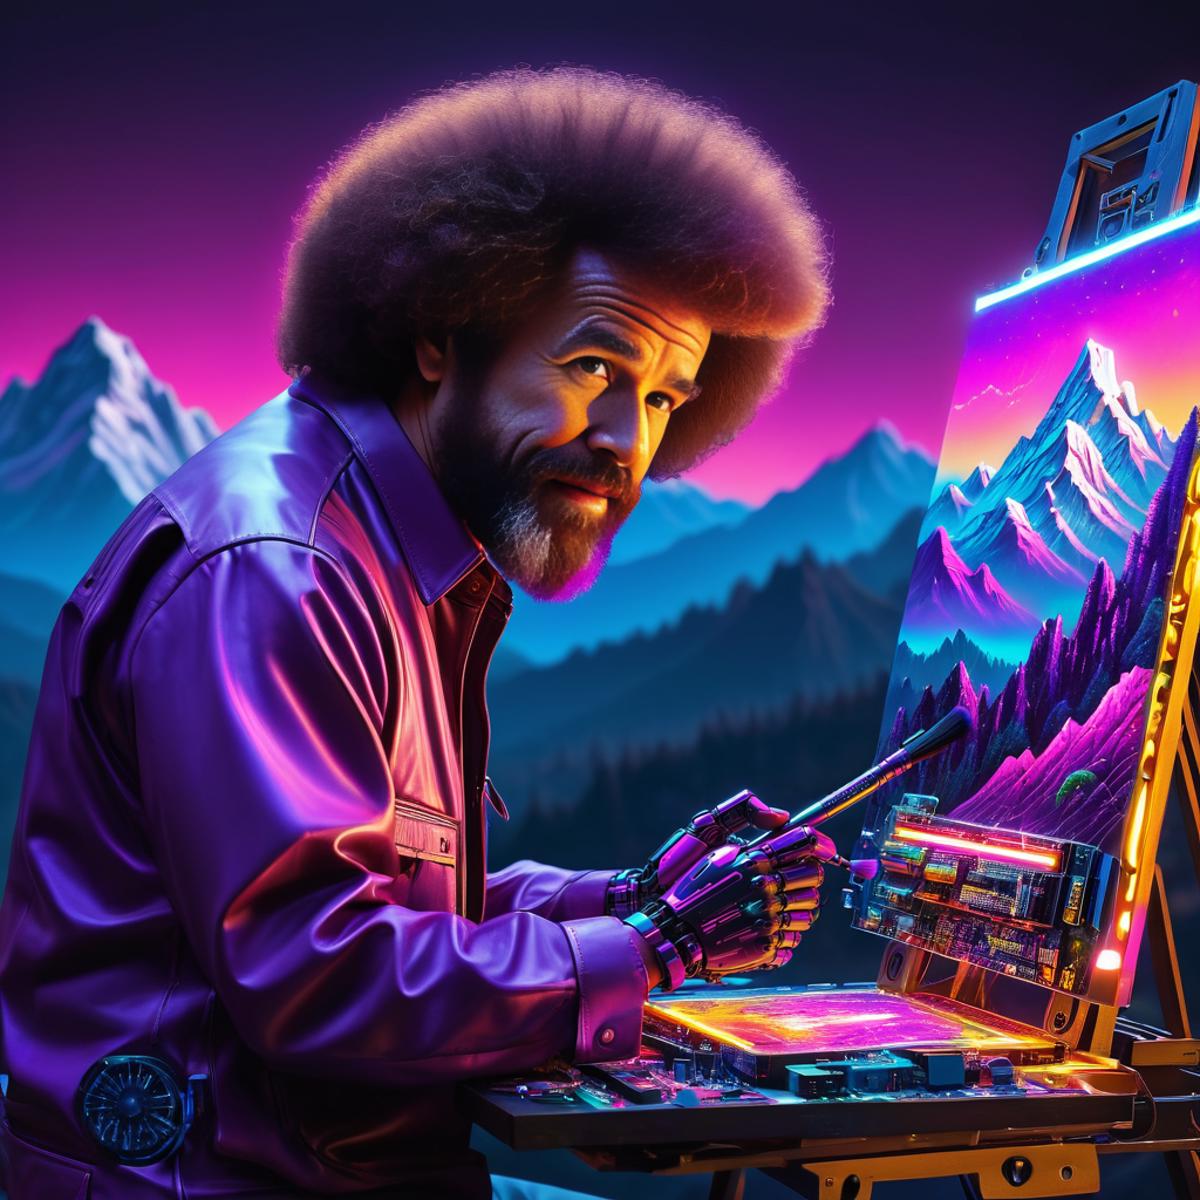 Artist in Purple Shirt Painting Mountains at Night